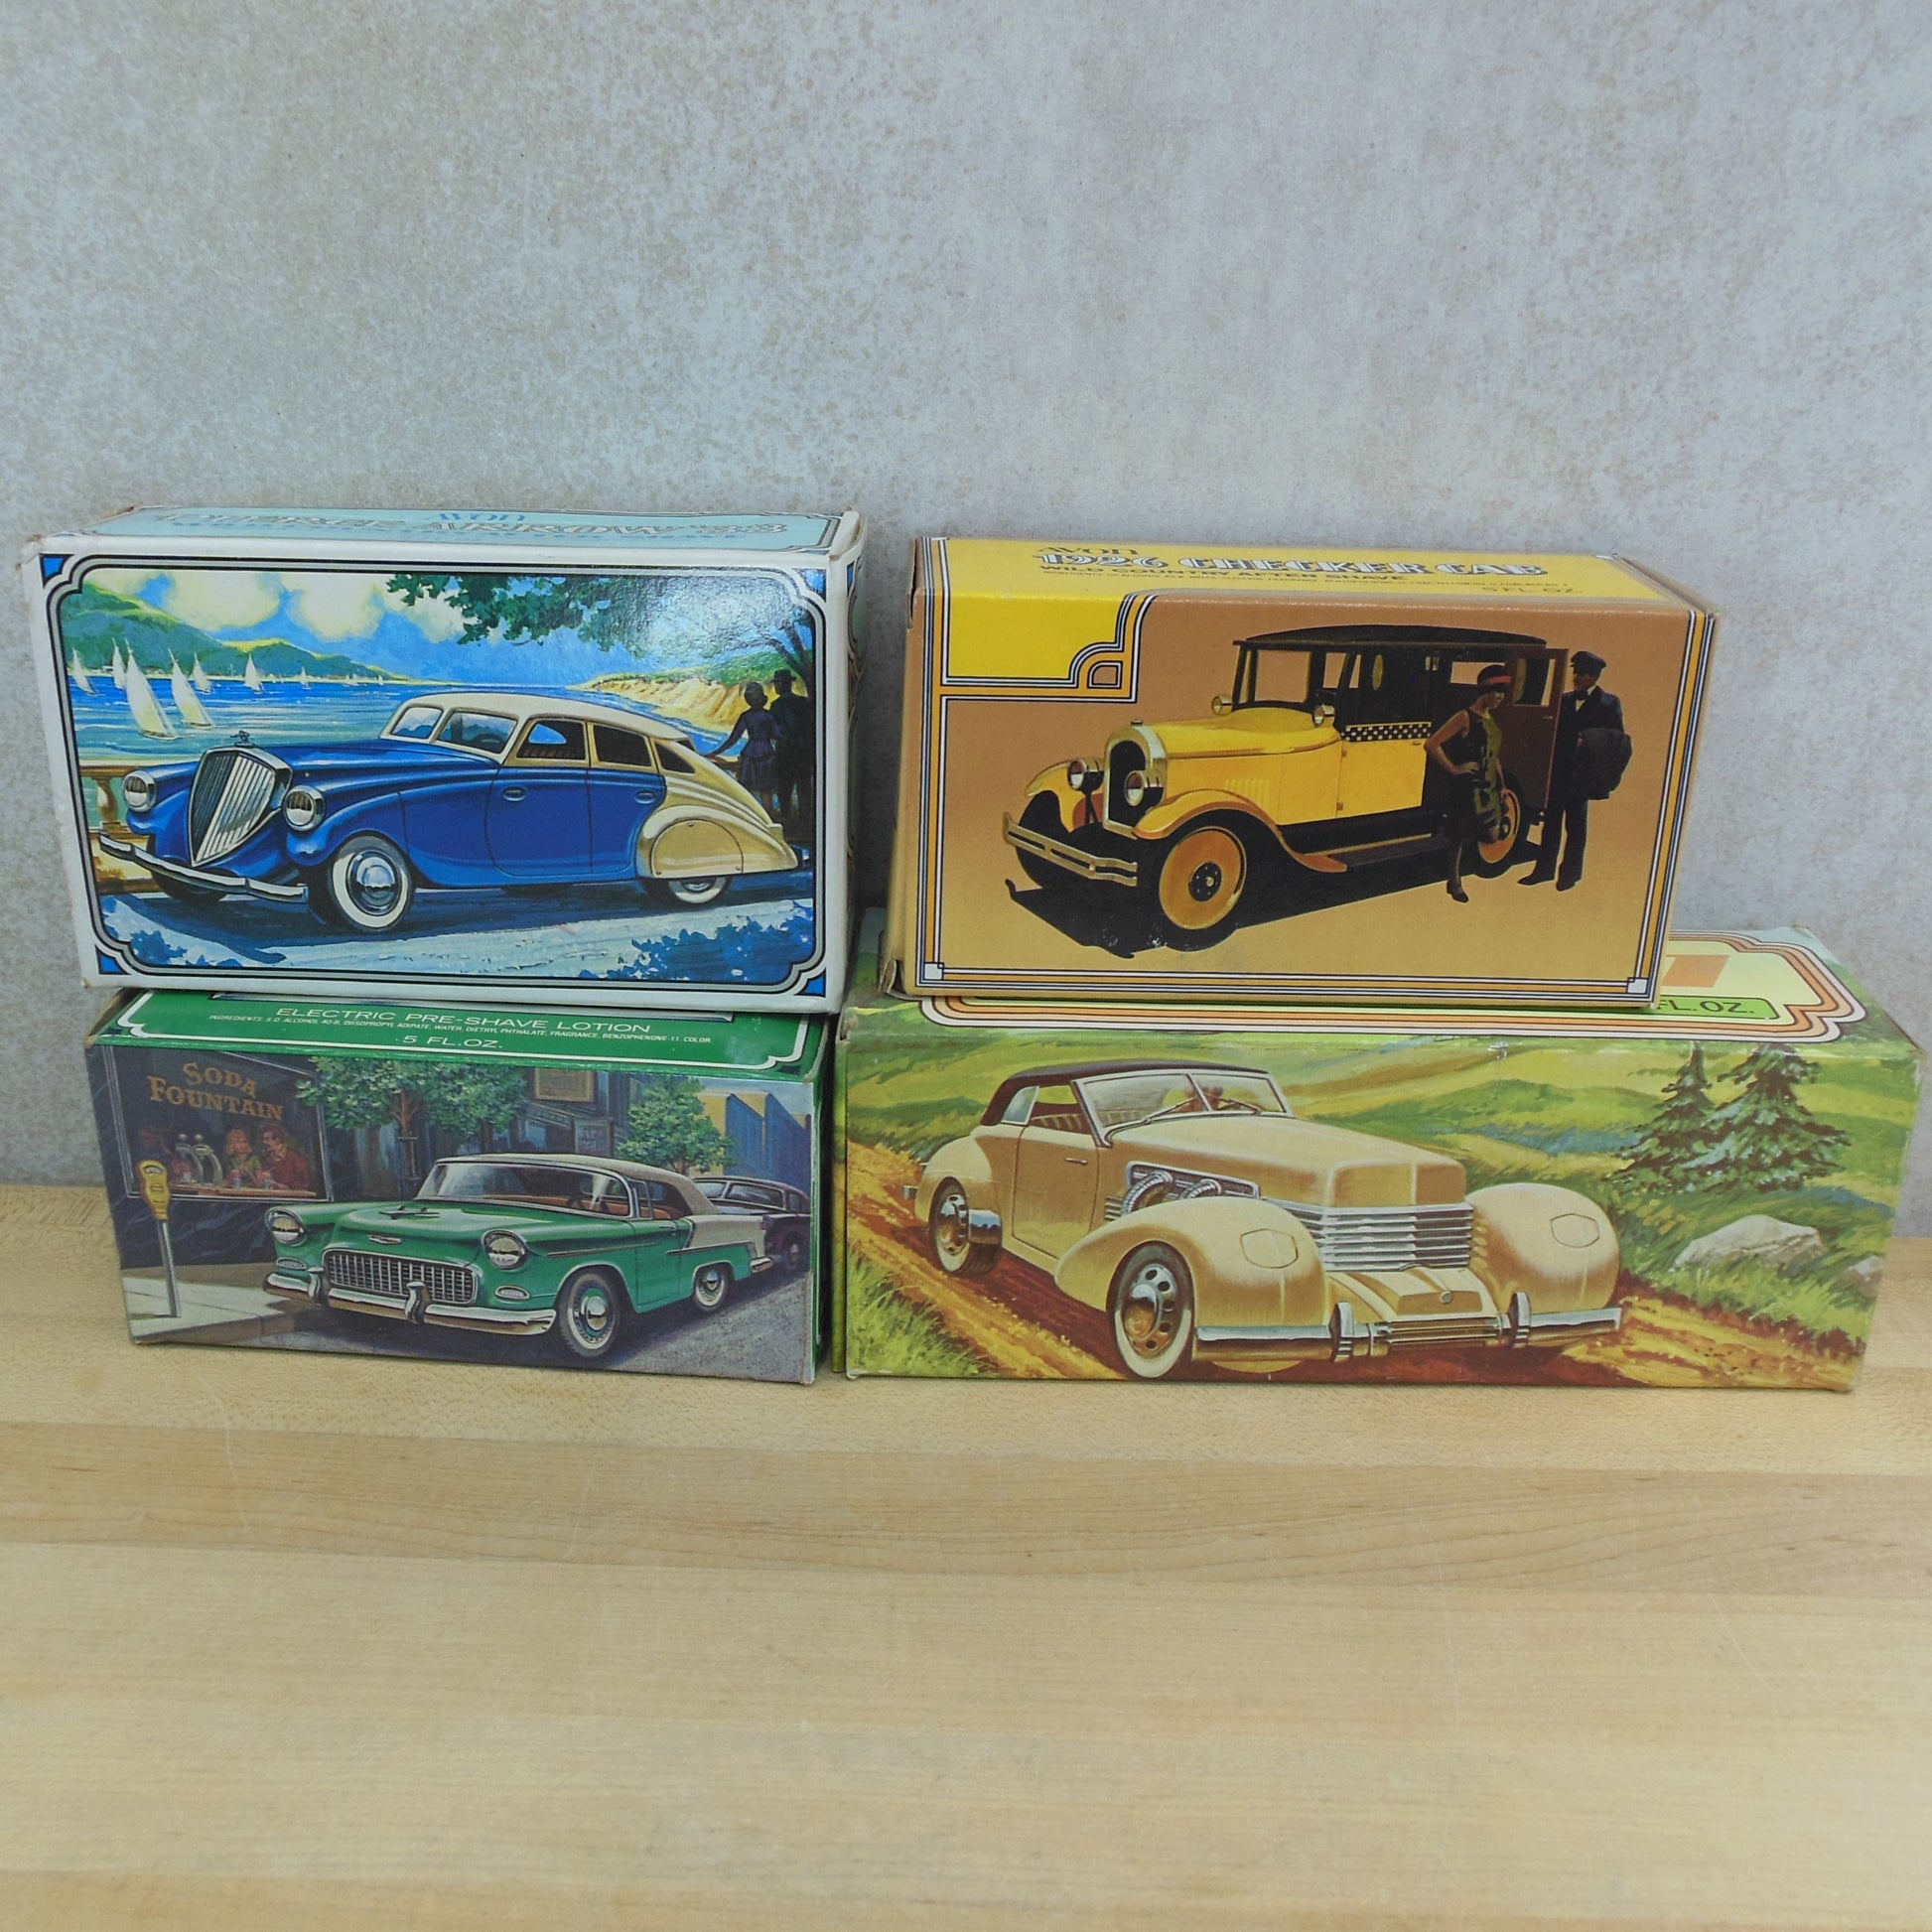 Avon Aftershave Bottles Boxed 9 Lot - Cars Ford Chevy Pierce Arrow Chrysler REO Cord Used